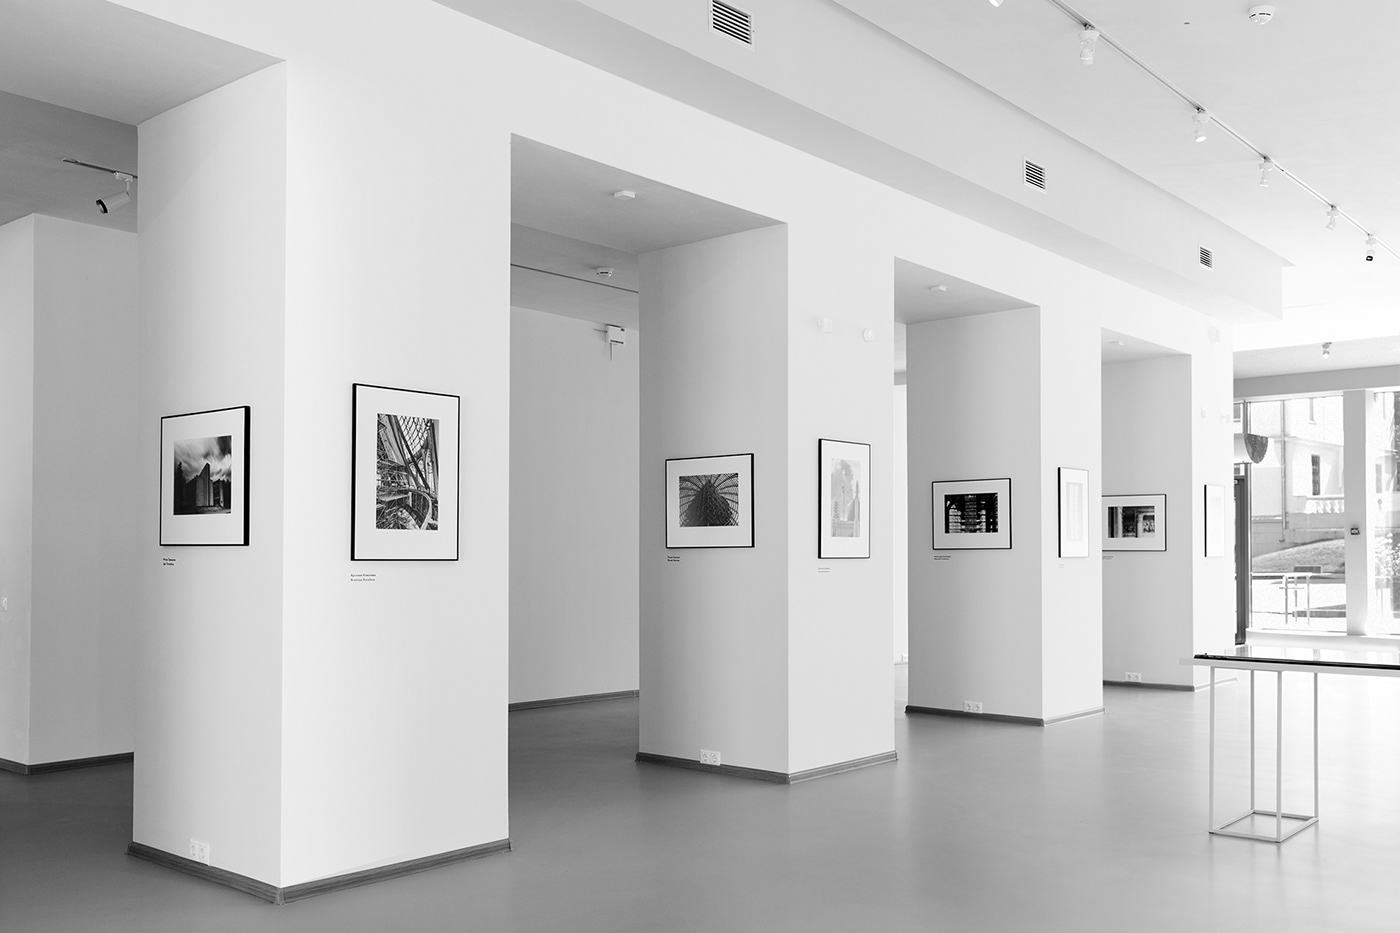 Documentary Photography architecture Architecture Photography gallery photo ussr history museum